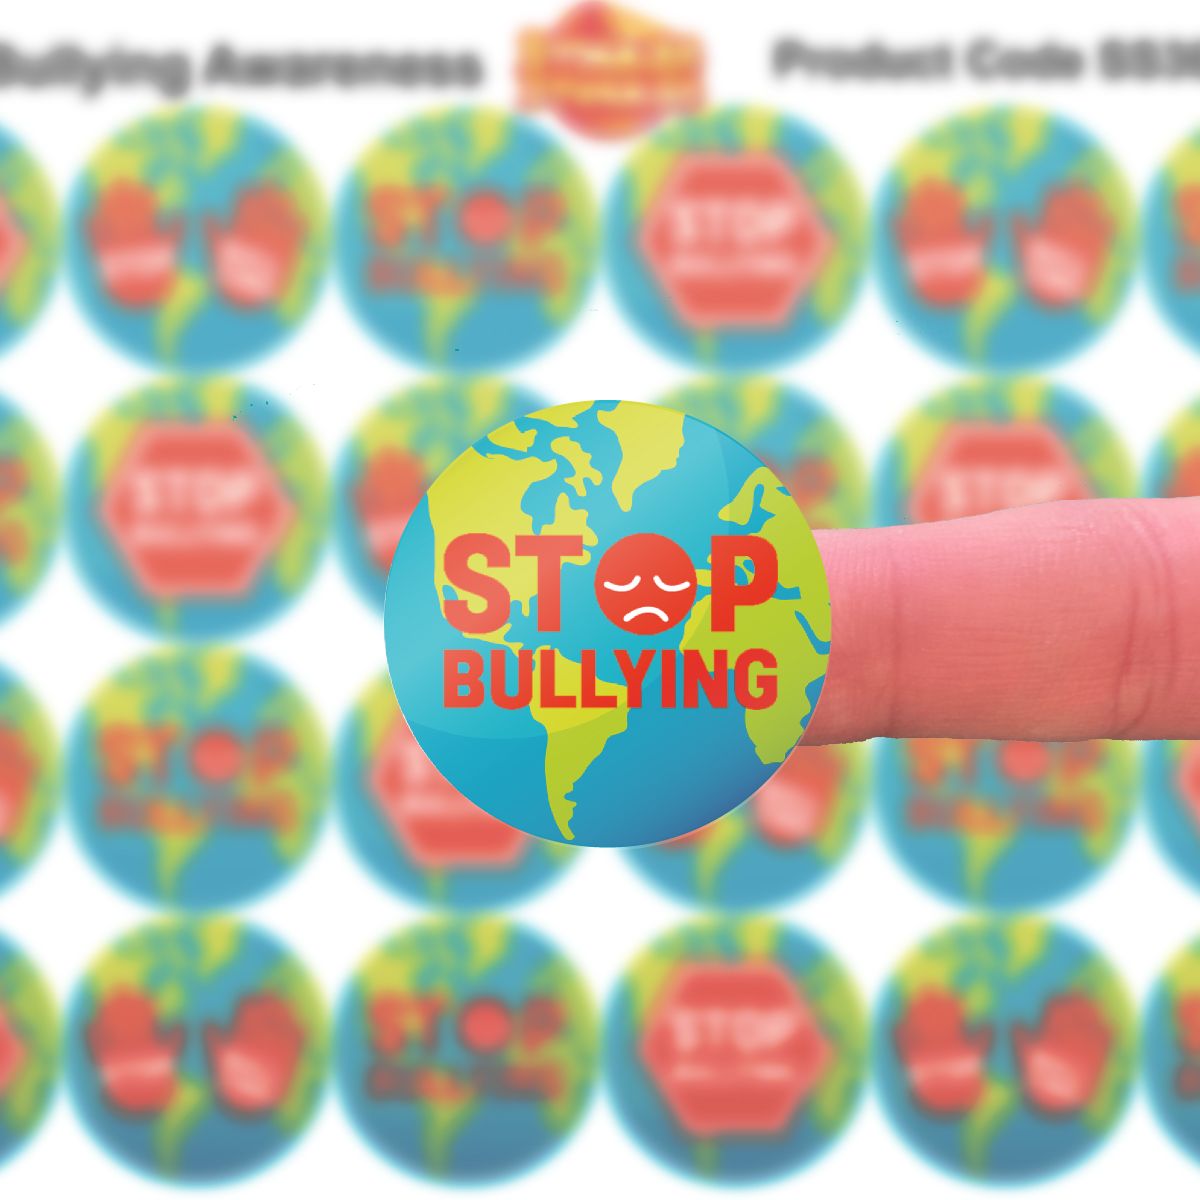 Raise awareness for Anti-Bullying Week from 13th November with our anti-bullying stickers and badges.

#ukteachers #ukschool #ukparents #anti-bullying #rewardstickers #stickershop #stickerrewards #stickerlove #Rewards #RewardSystem #teacherlife #teacherstyle